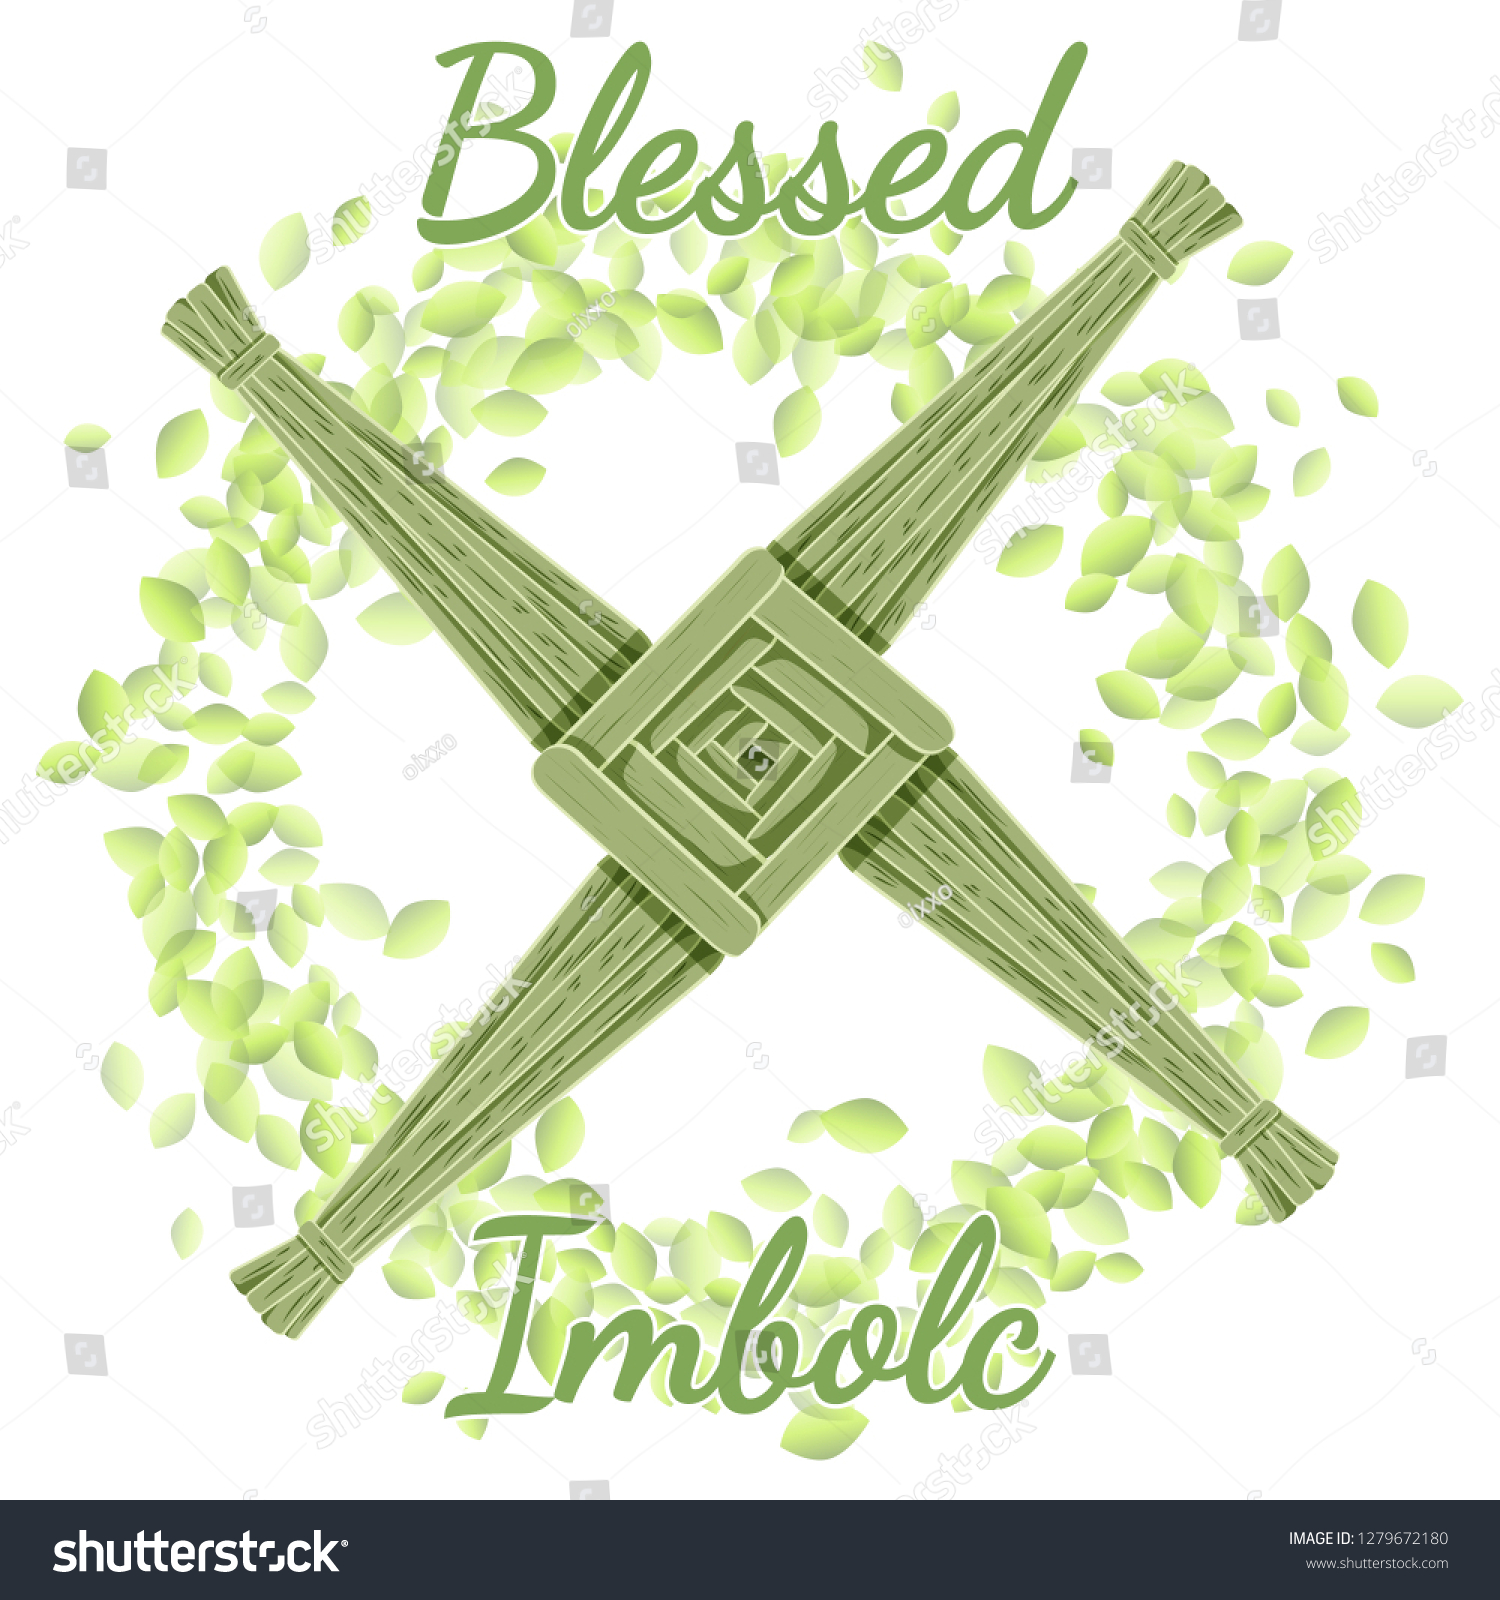 SVG of Blessed Imbolc. Beginning of spring pagan holiday. Brigid's Cross in a wreath of green leaves svg